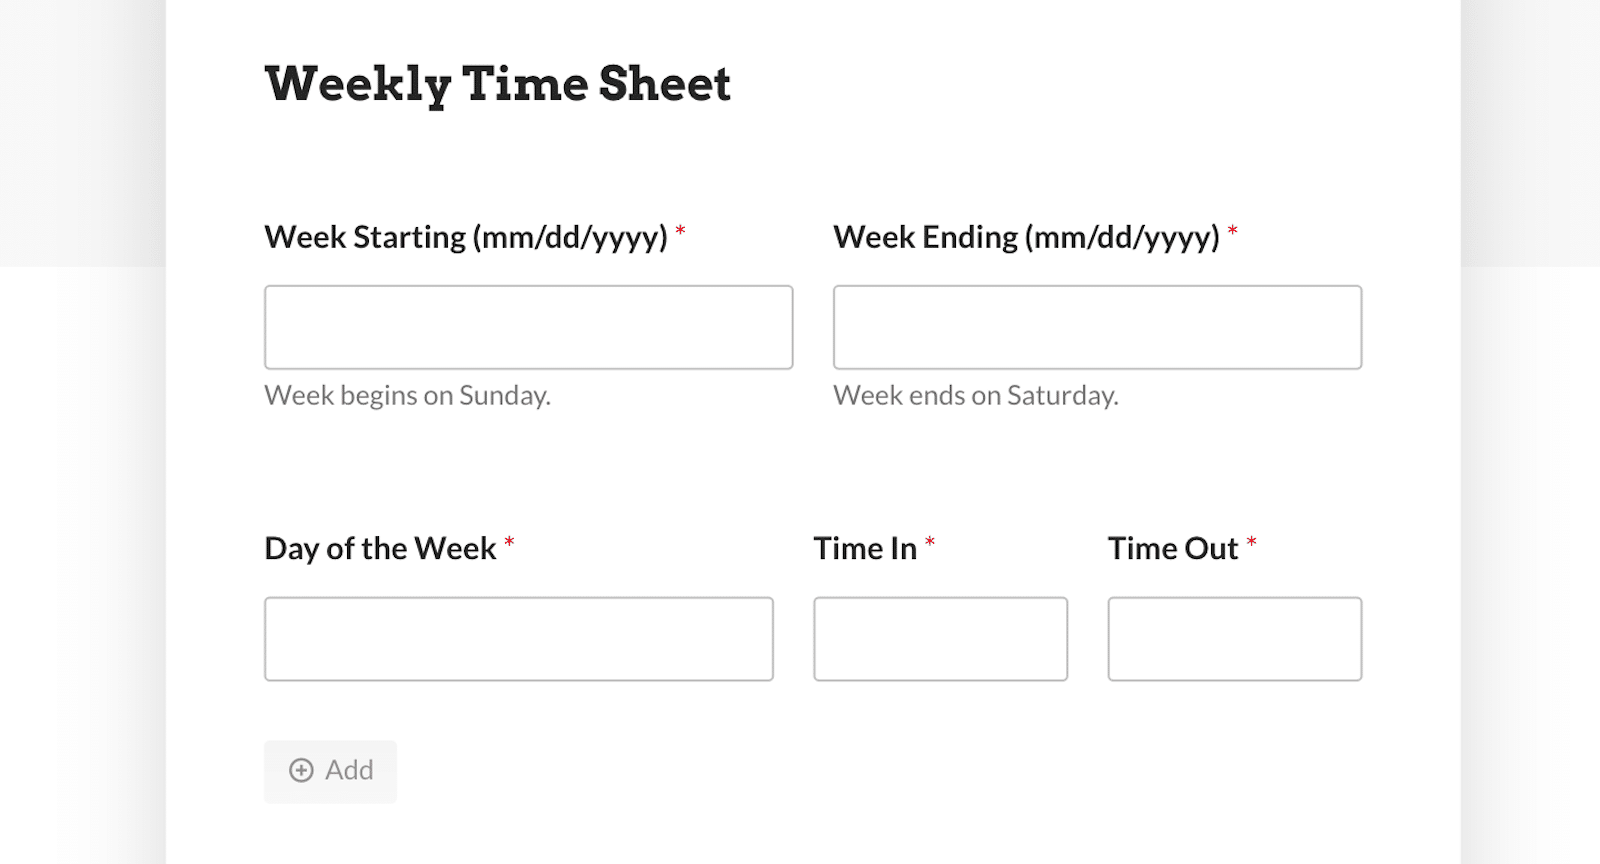 The weekly timesheet section of the form template